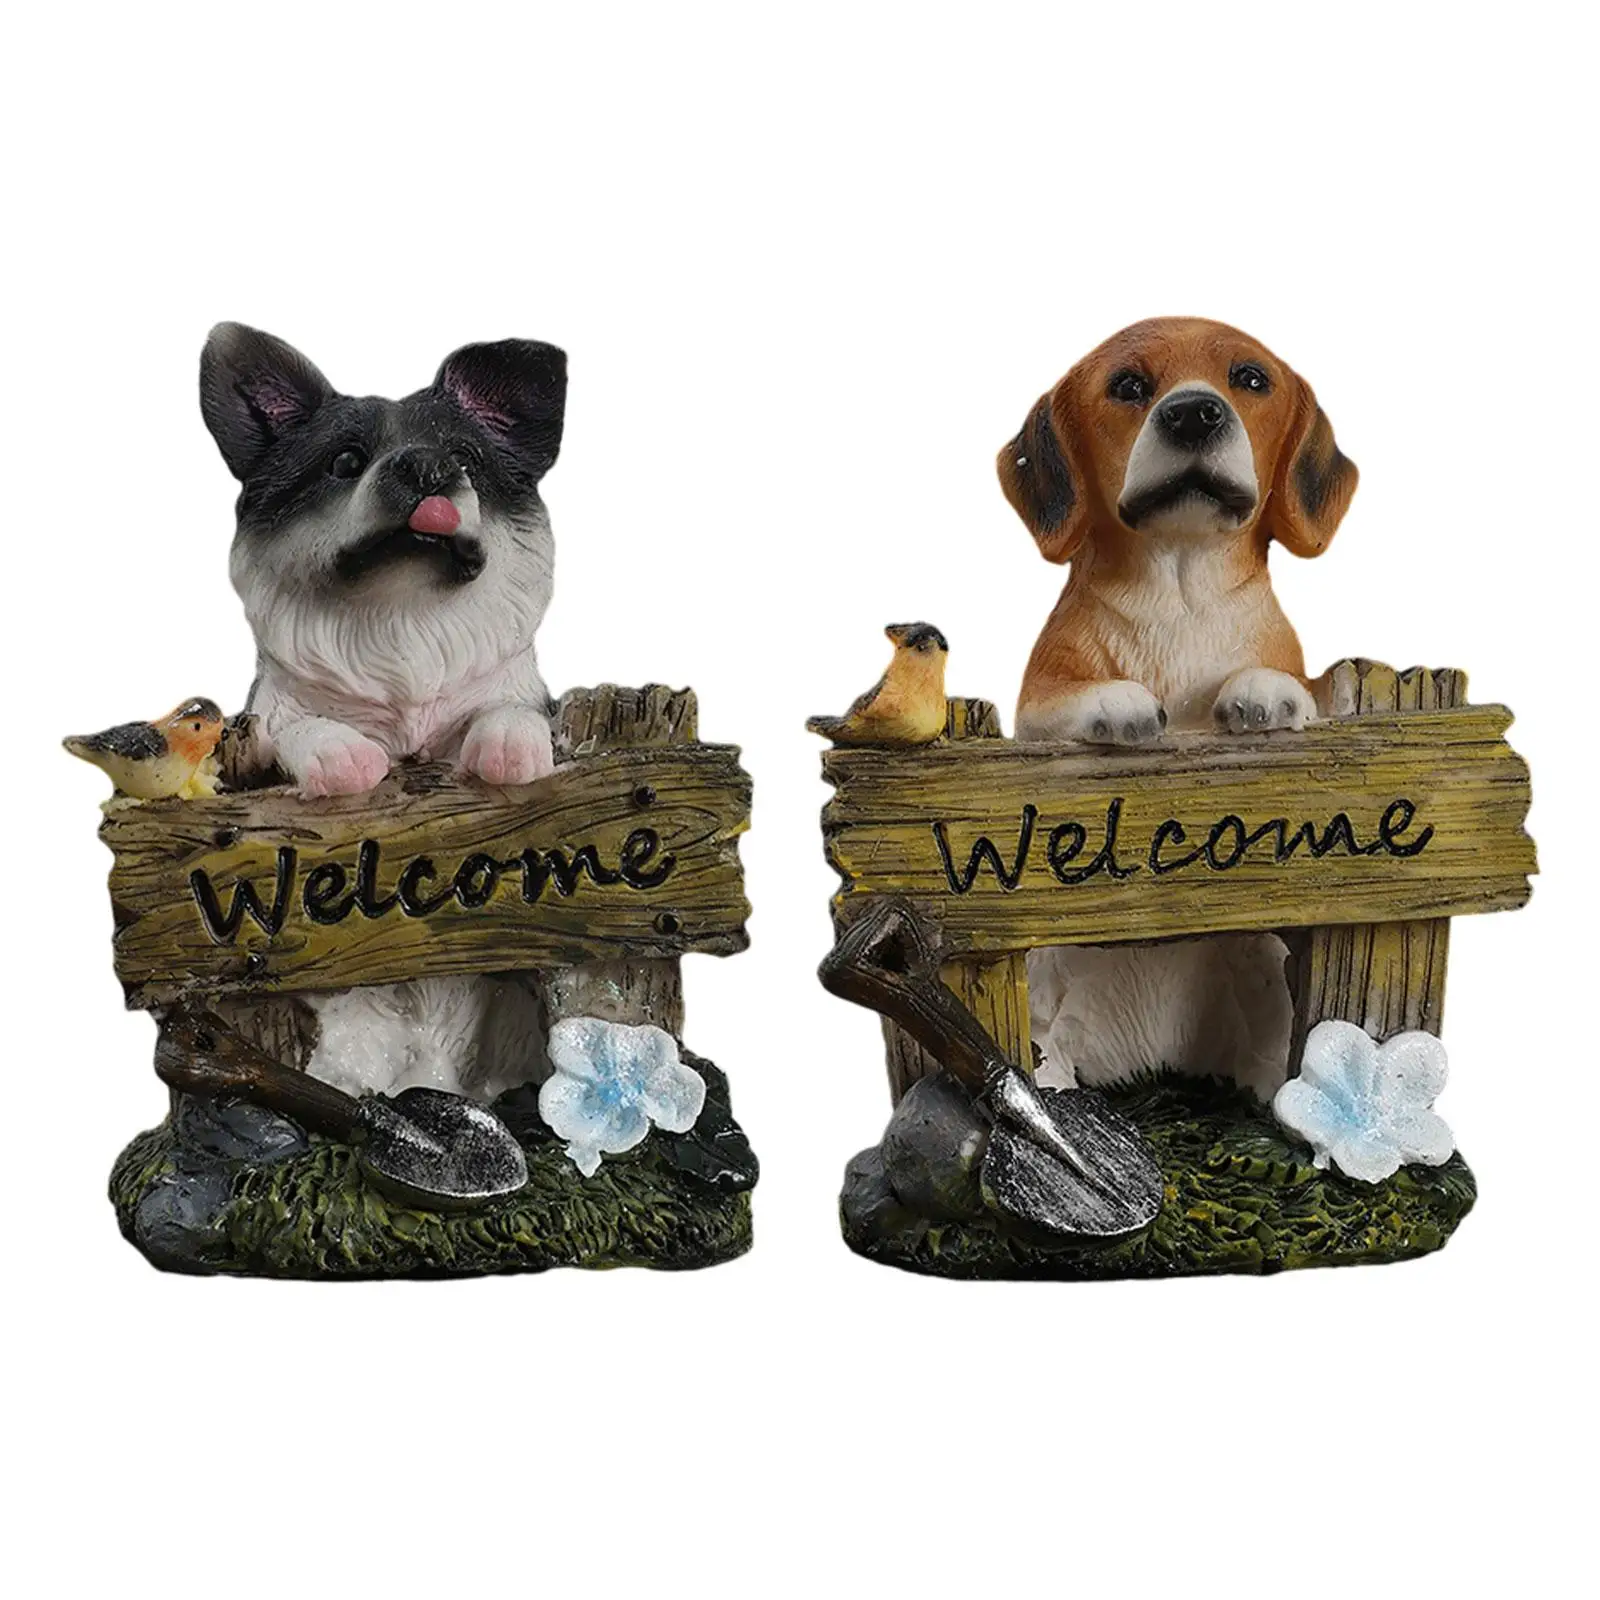 Garden Dog Statue Welcome Dog Statue Puppy Statue Tabletop Ornament Animal Sculpture for Balcony Desk Yard Indoor Outdoor House